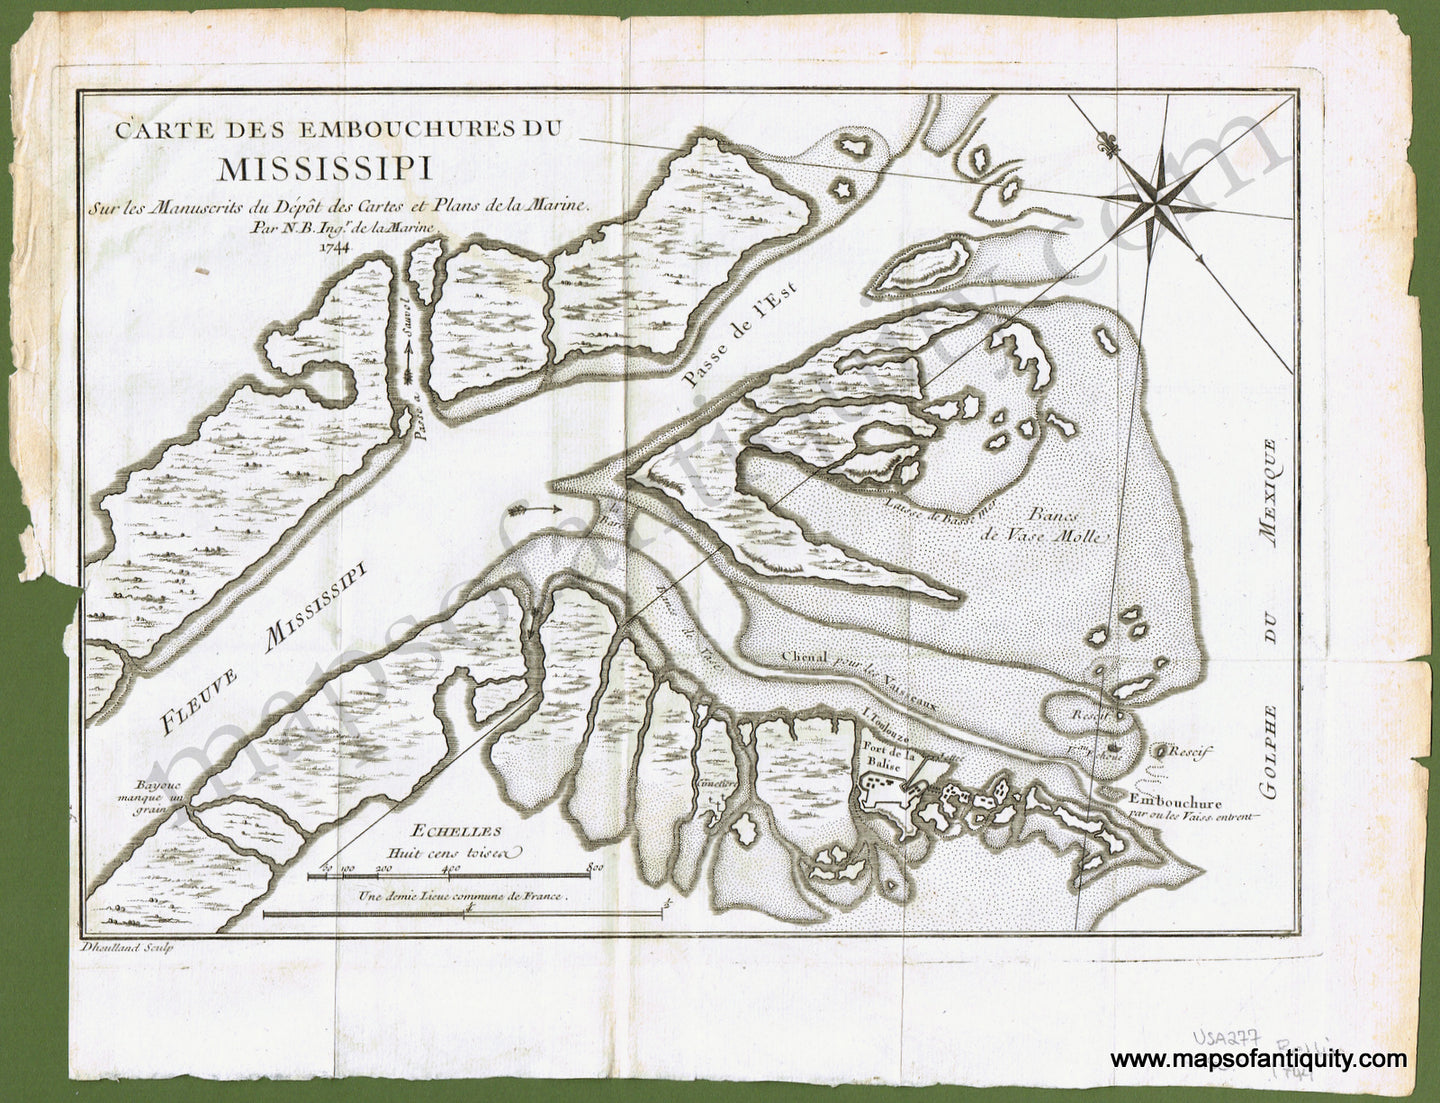 Antique-Black-and-White-Map-Carte-des-Embouchures-du-Mississipi-**********-United-States-South-1744-Bellin-Maps-Of-Antiquity